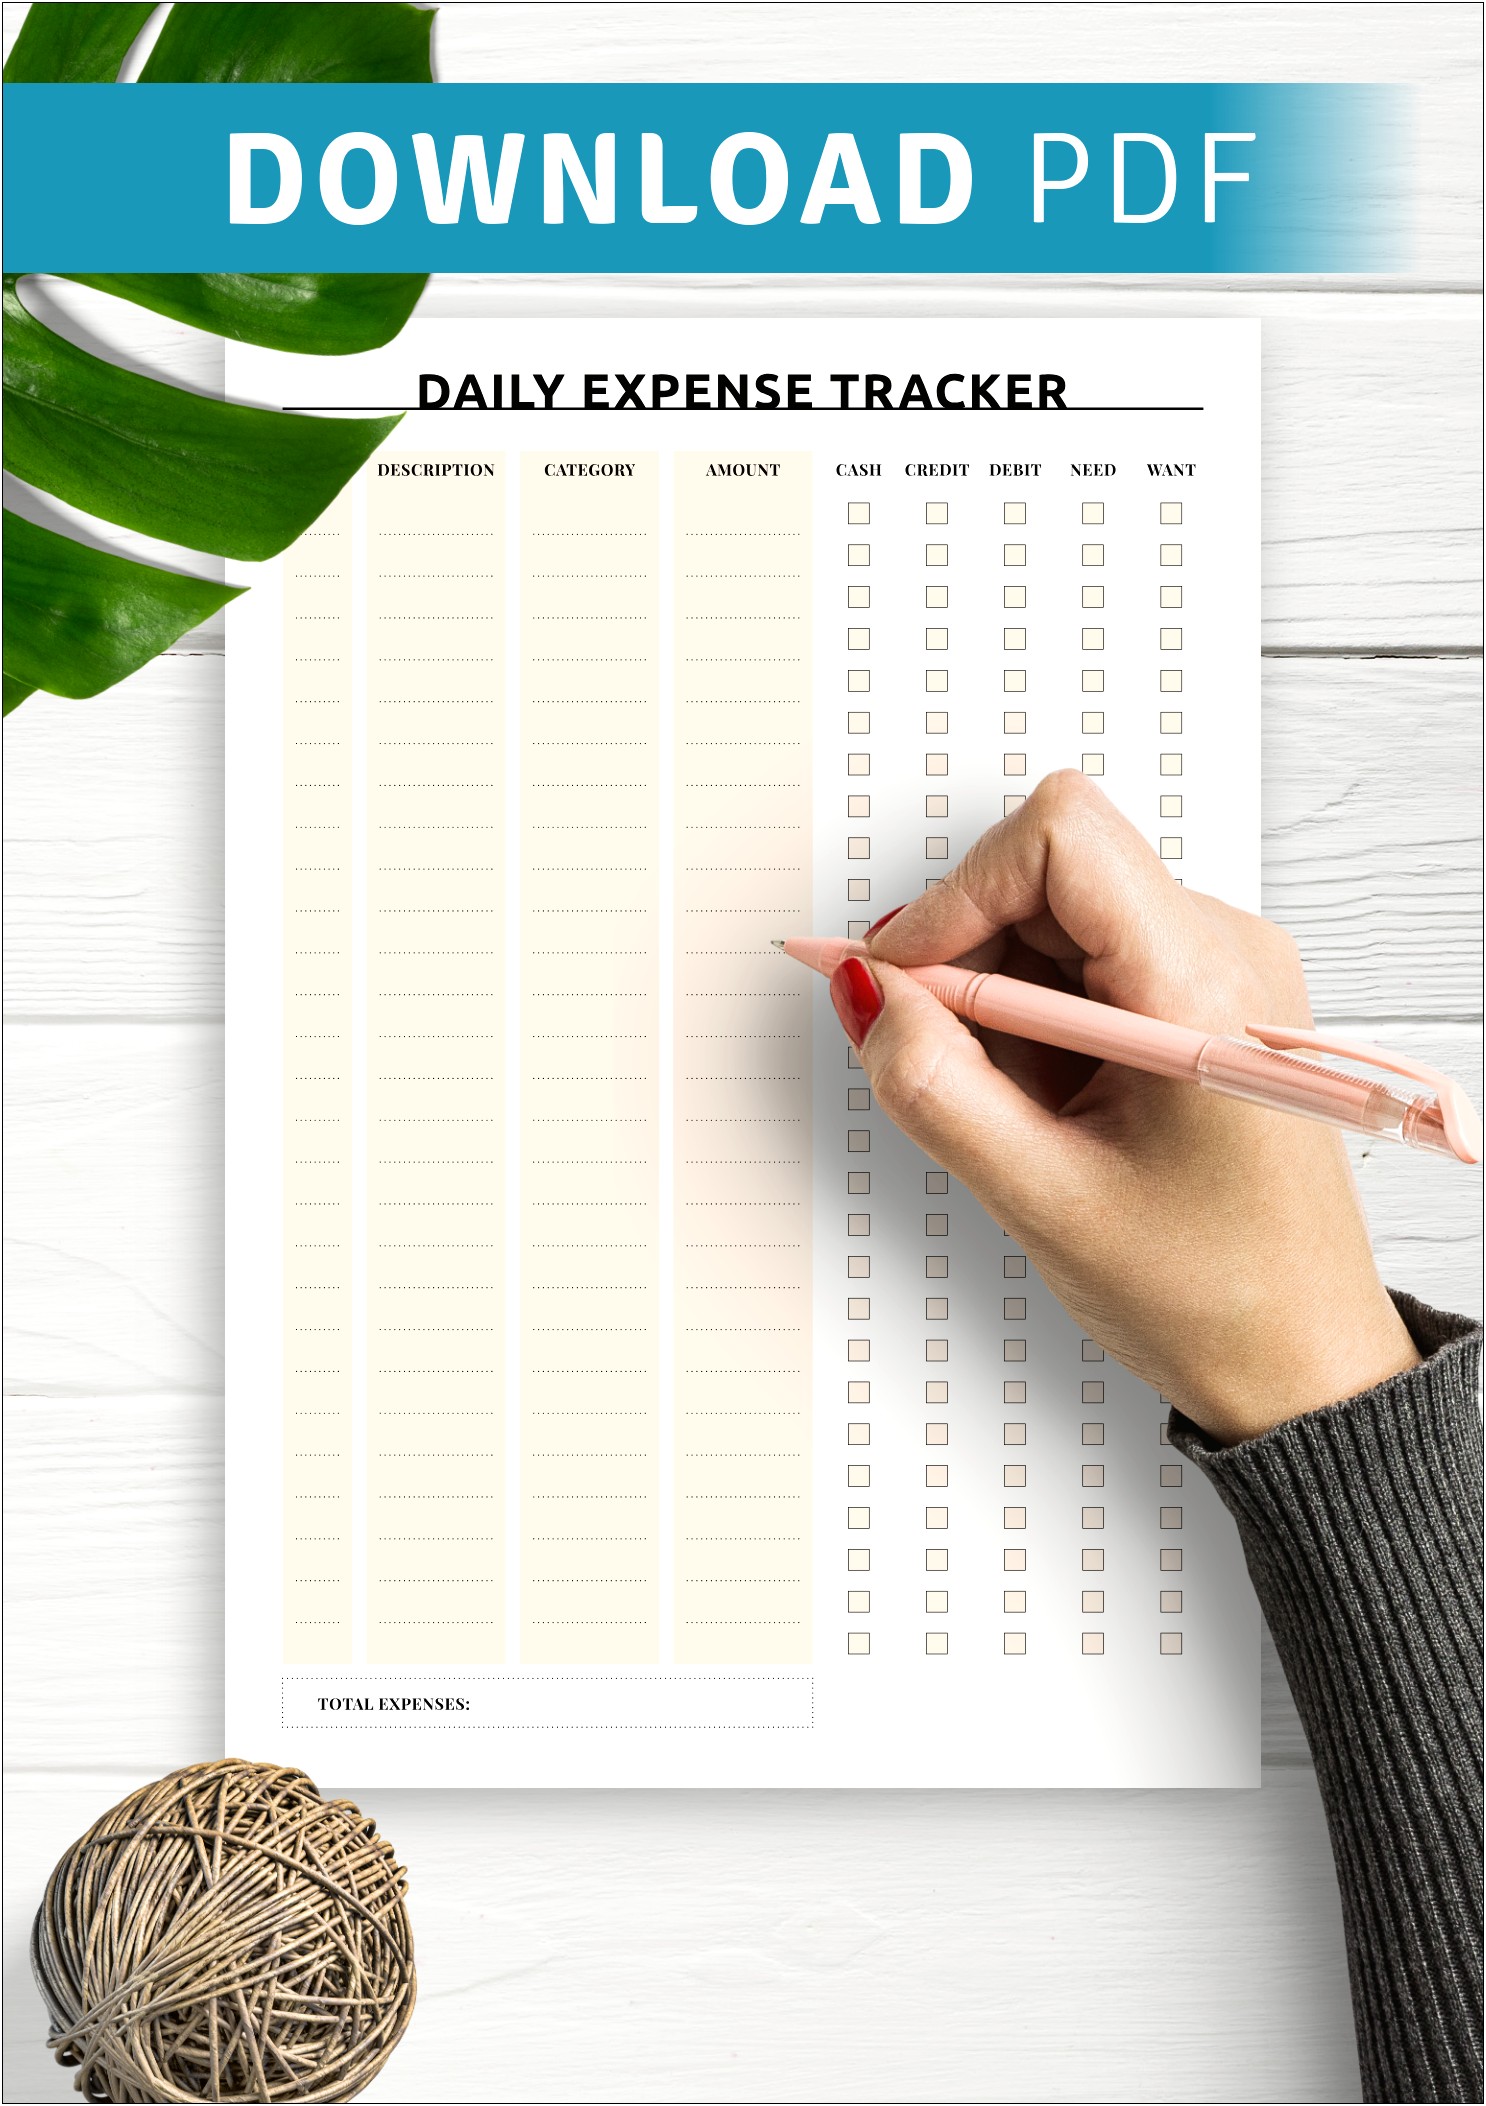 Daily Personal Expense Tracker Excel Sheet Free Download